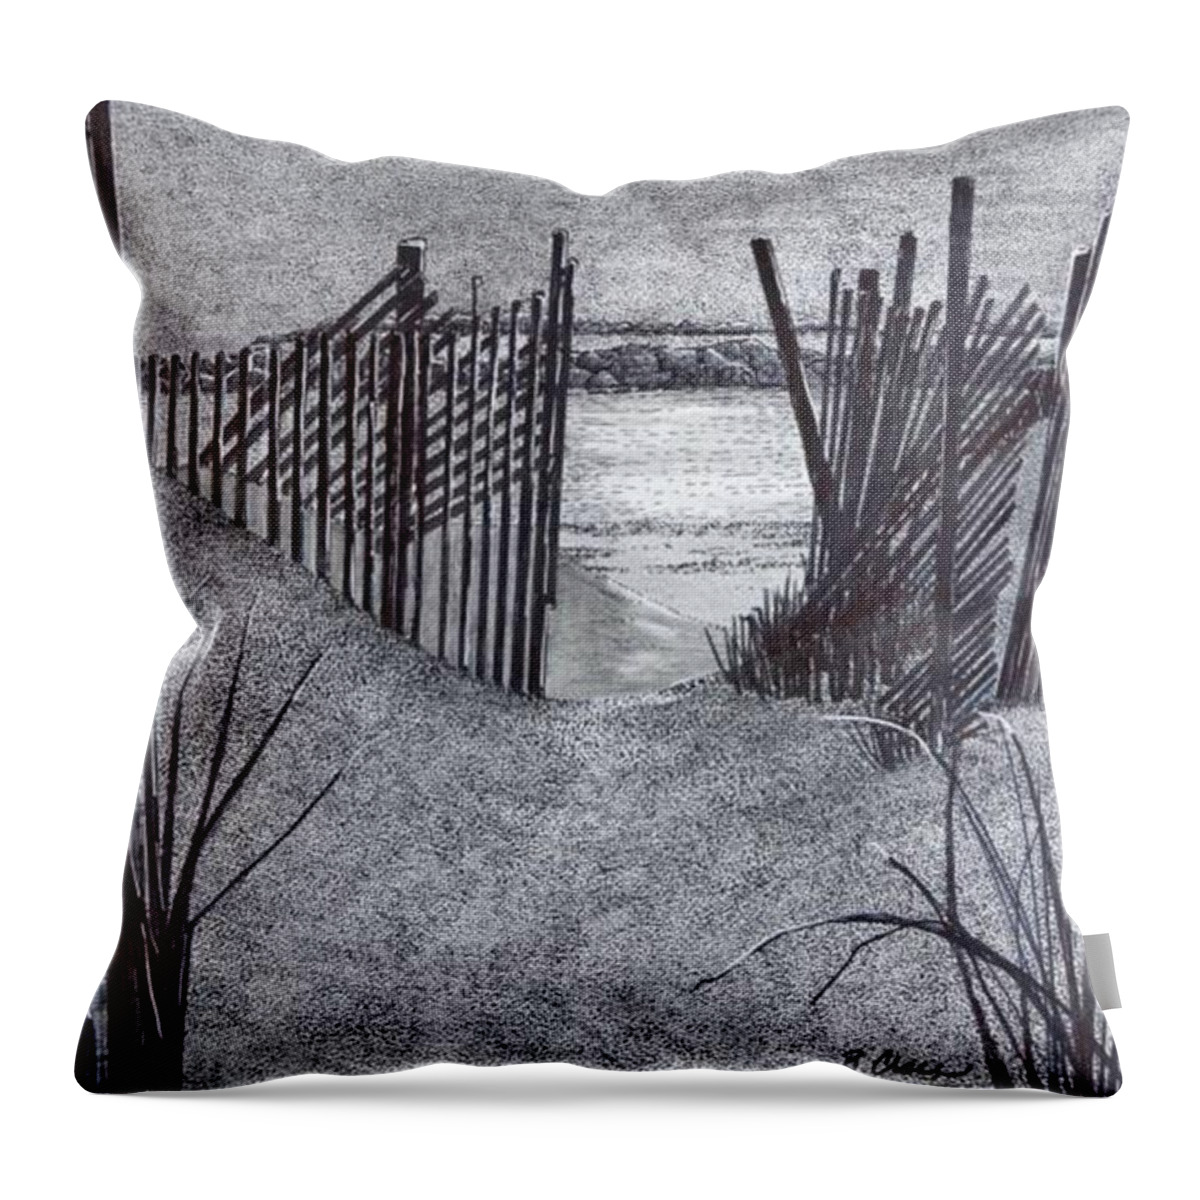 Pen And Ink Throw Pillow featuring the drawing Falling Fence by Betsy Carlson Cross